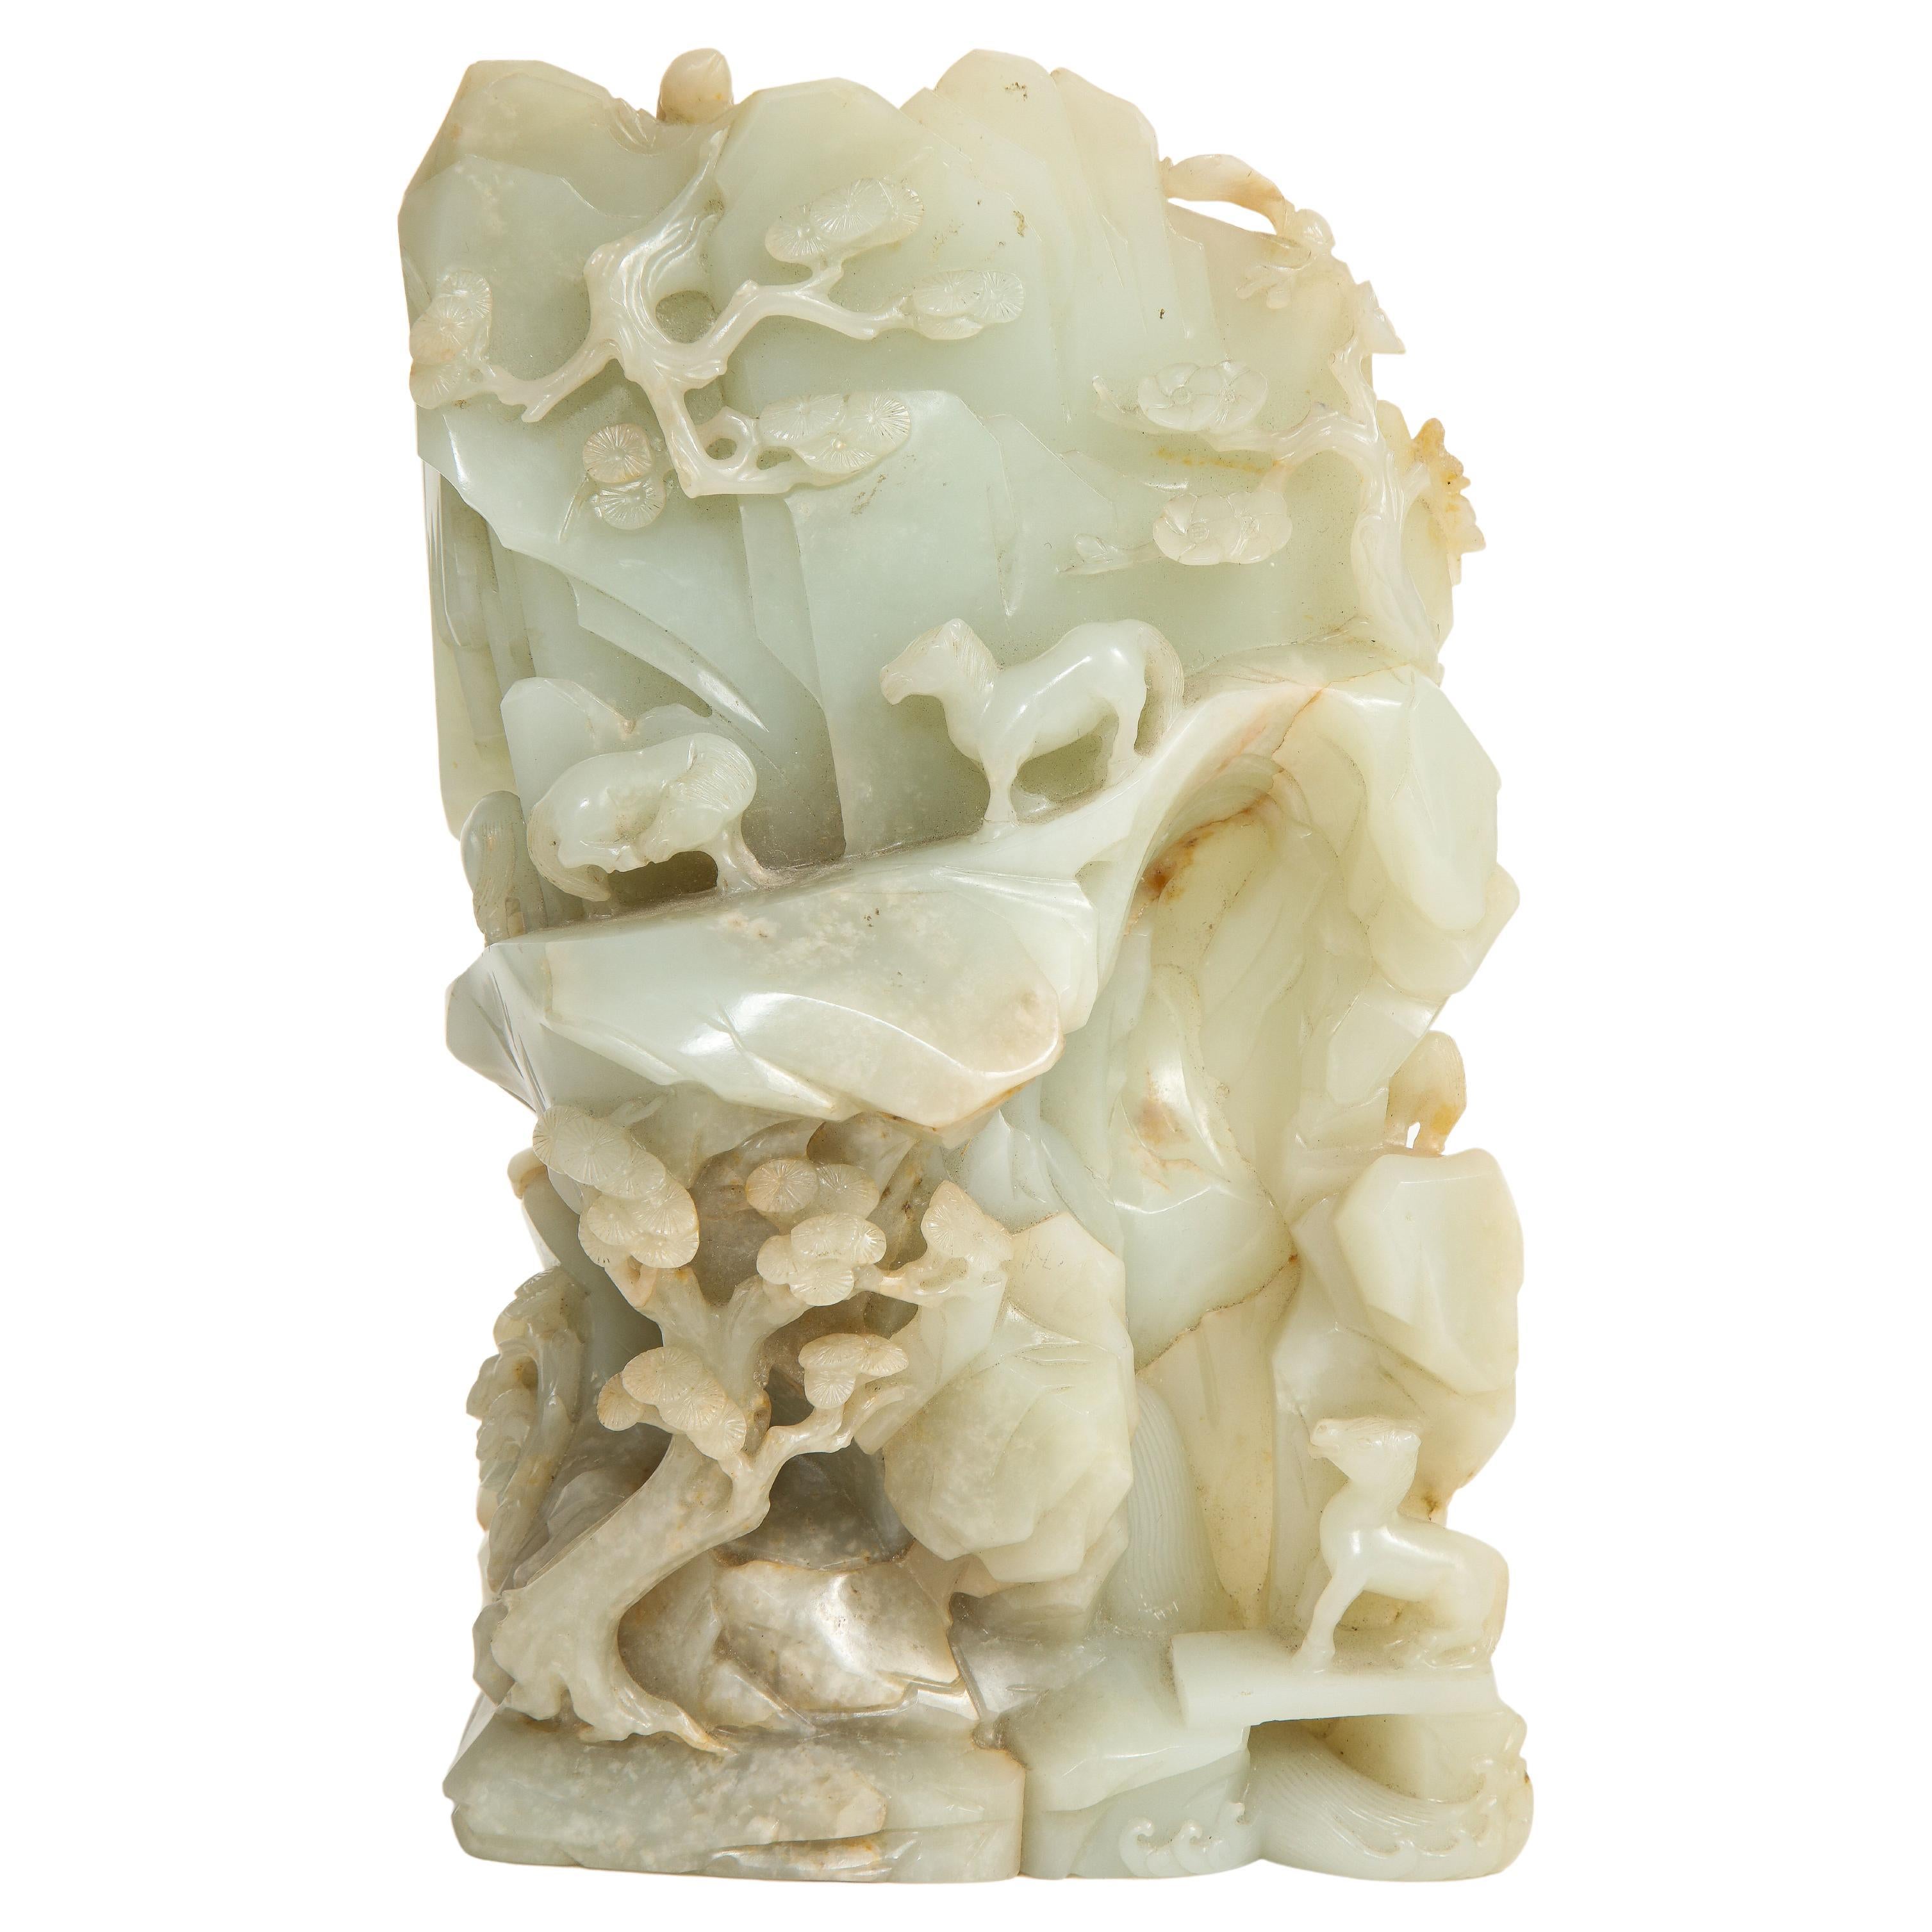 Large 18th/19th C. Chinese Pale Celadon Jade High Relief Hand-Carved Mountain